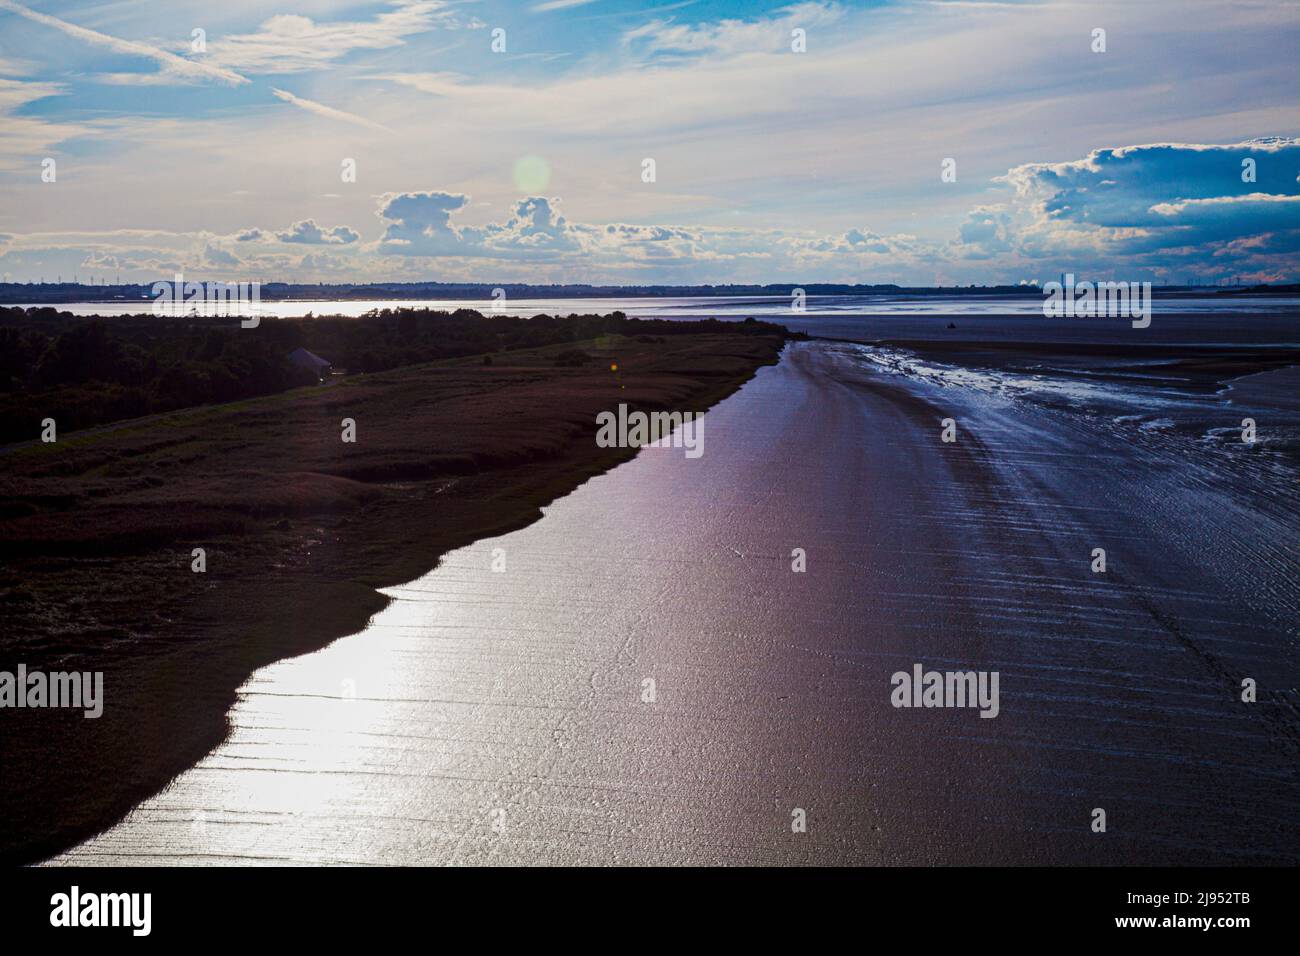 edge of land with vividly lit up mud dunes with Humber Estuary, UK captured from the Humber Bridge Stock Photo